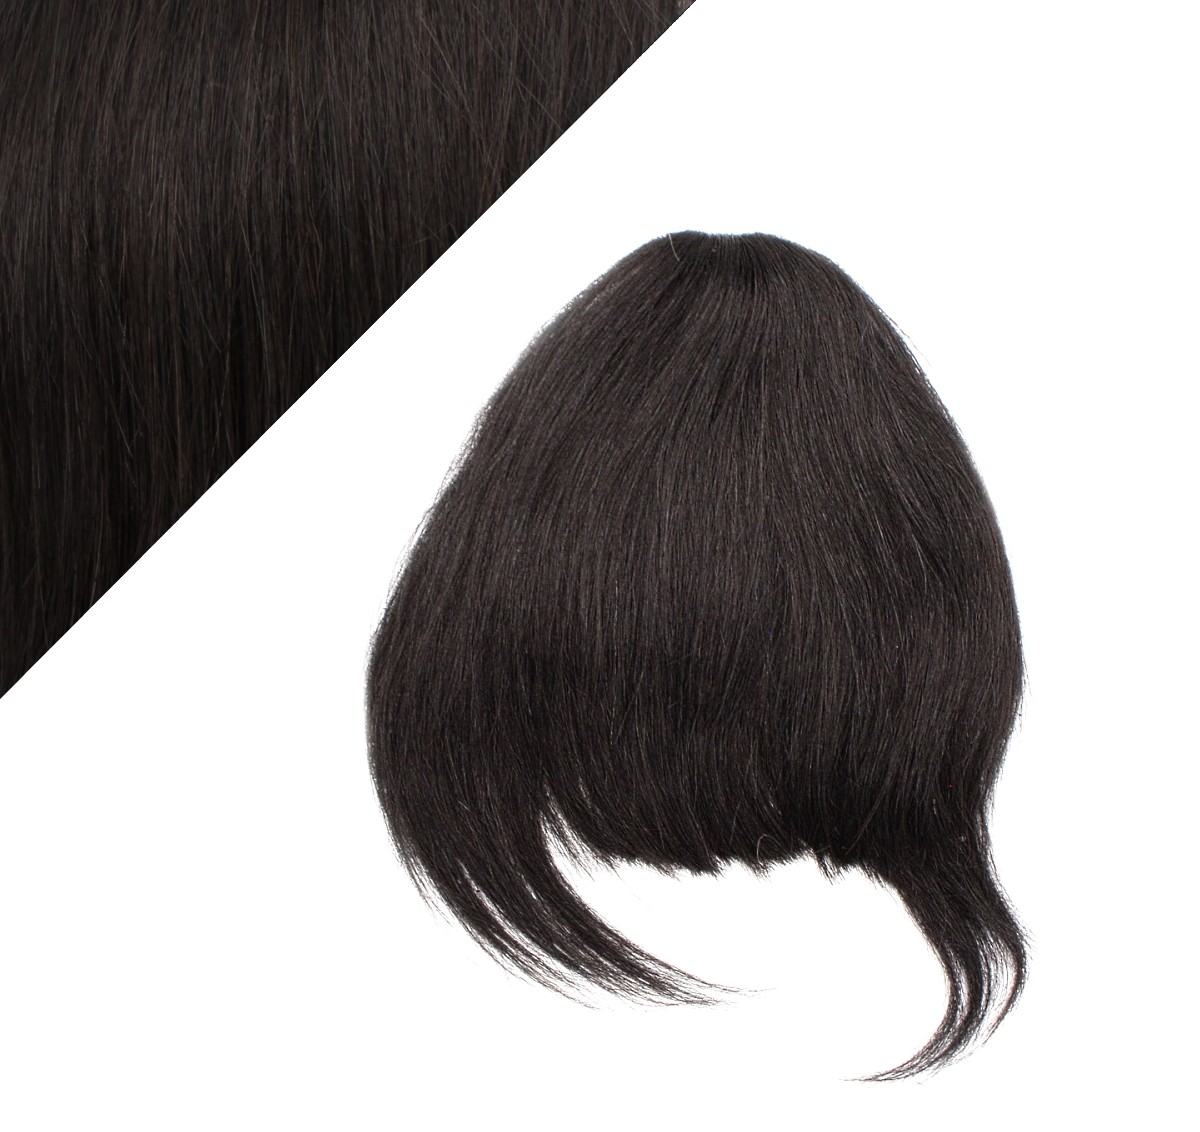 Clip in Bangs Natural Black Bangs Clip in Fringe Hair Extensions Remy Human  Hair with Temples Natural Color for Women